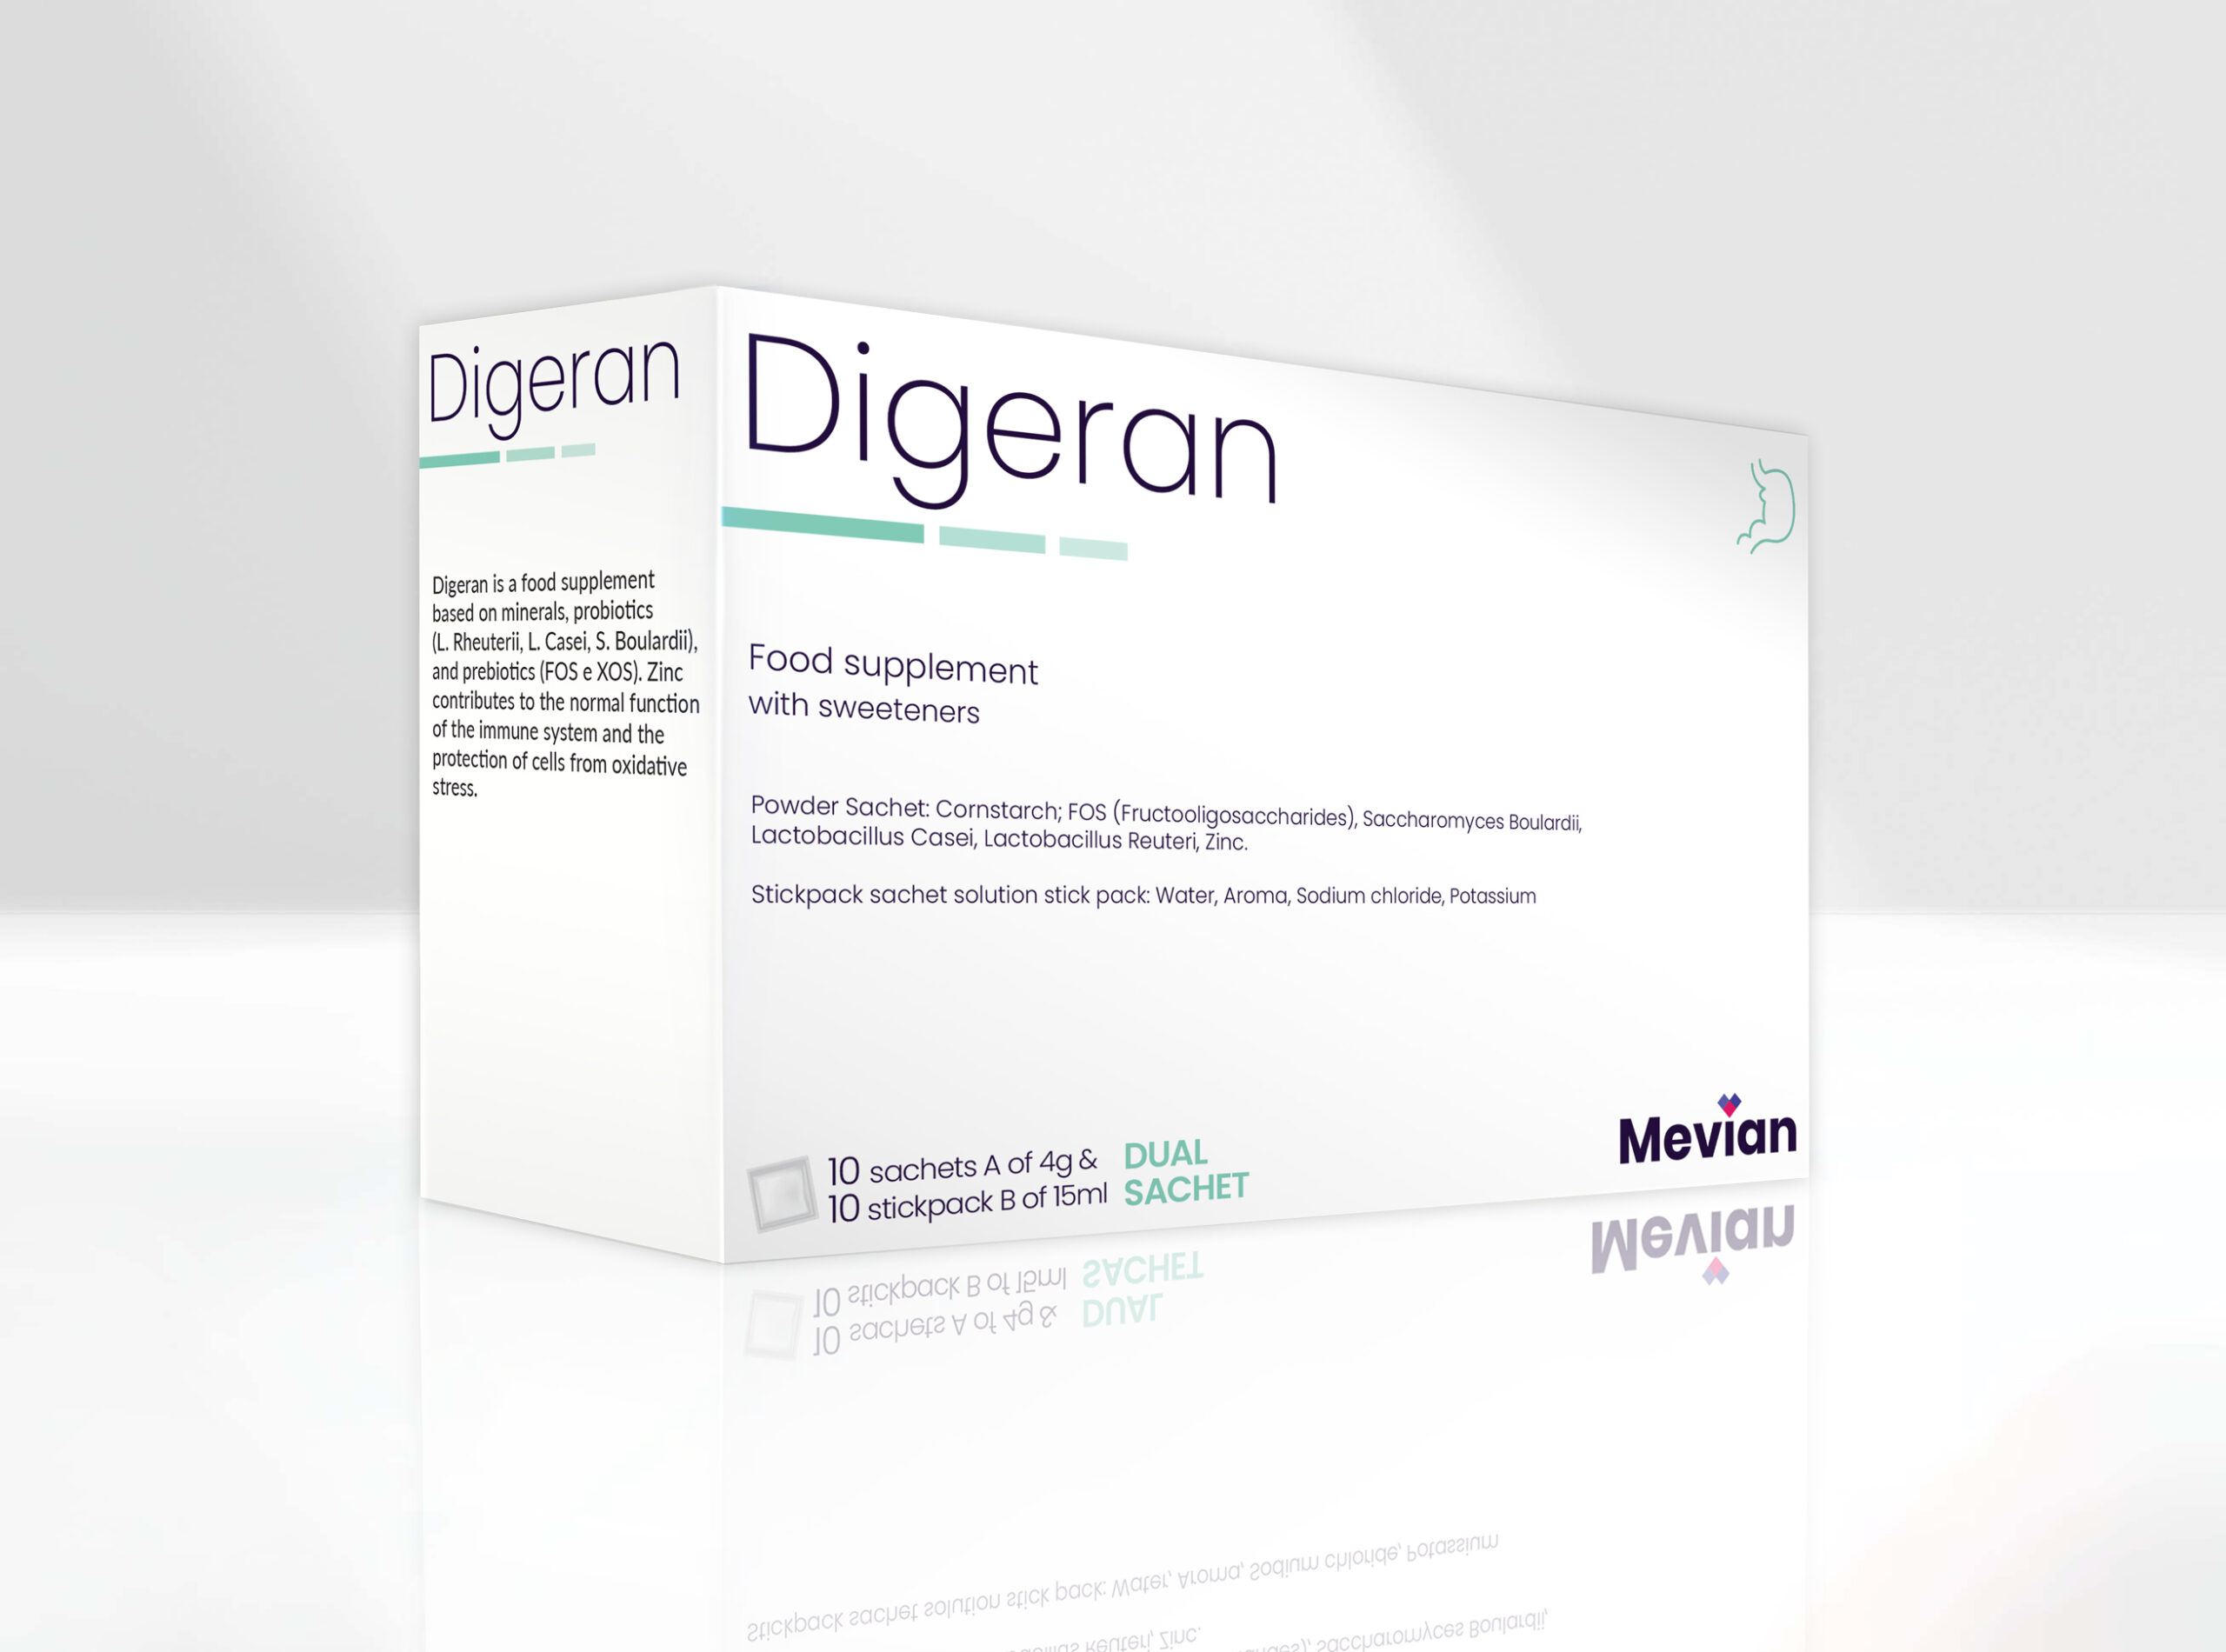 Digeran balances the intestinal flora, boosts the immune system with minerals (ORS), and provides protection of cells from oxidative stress. Ideal after liquid loss (vomiting or diarrhea).